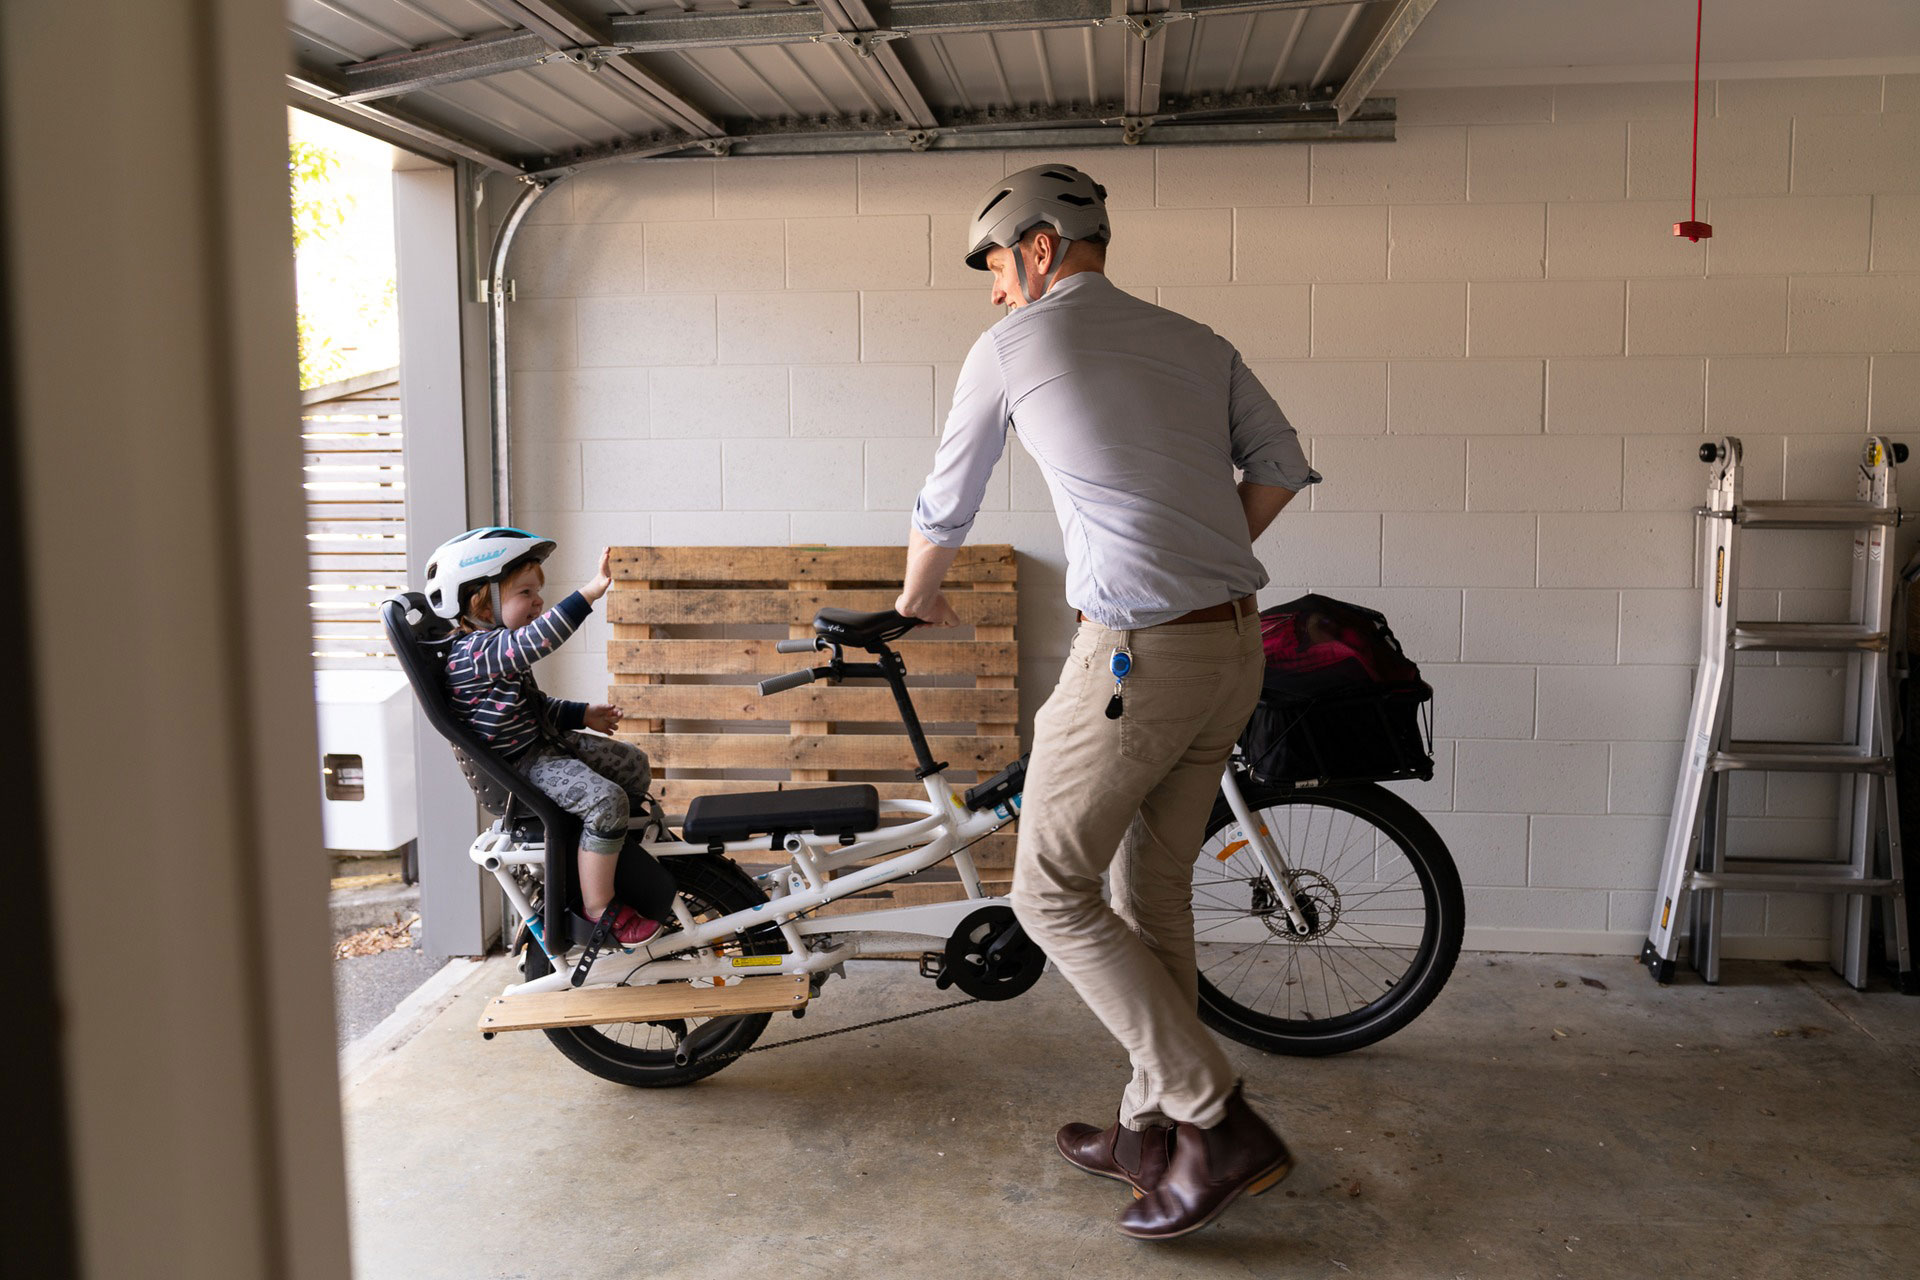 James taking his cargo bike out of the garage, with his child on the rear seat.